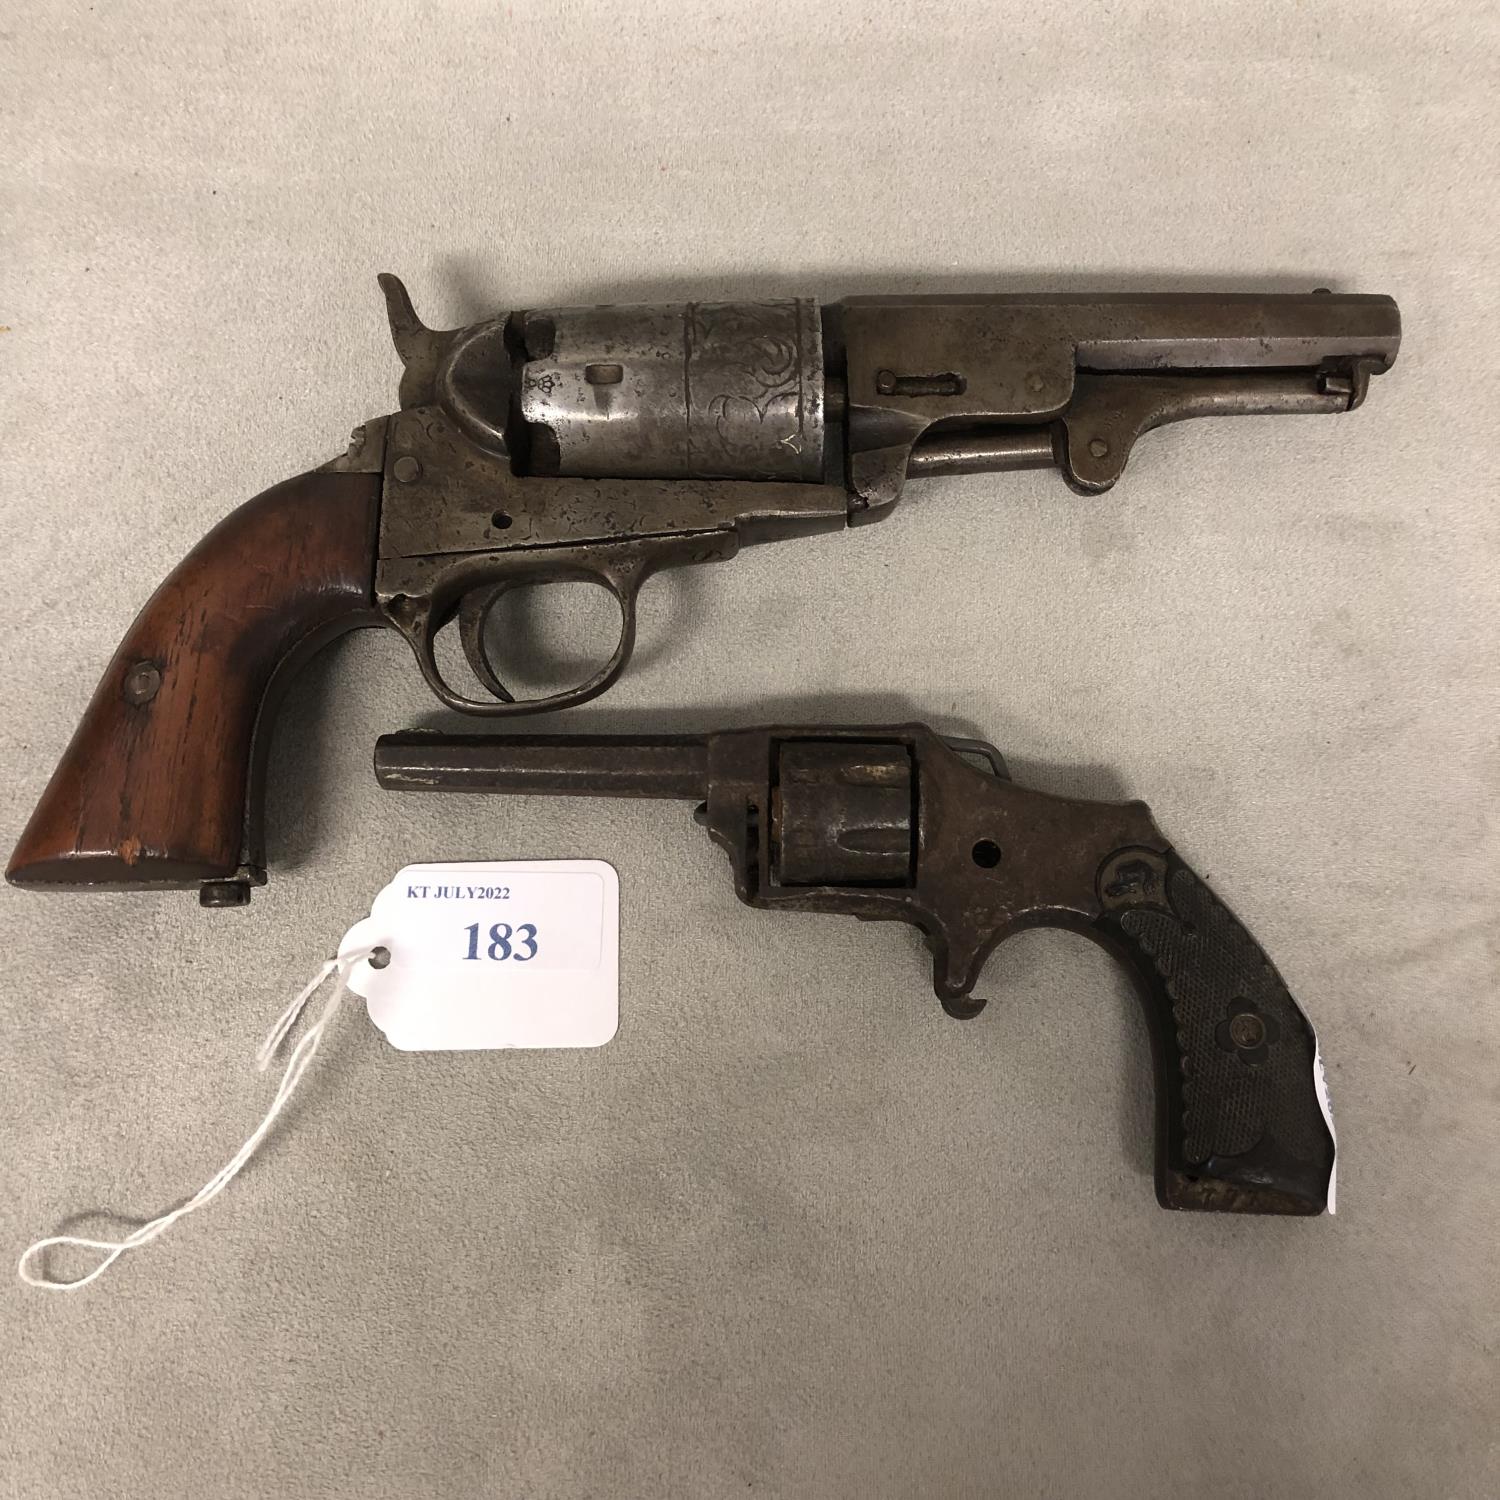 Two C19th obsolete pistols, one with engraved barrel and walnut stock, and a small pin fire - Image 7 of 7